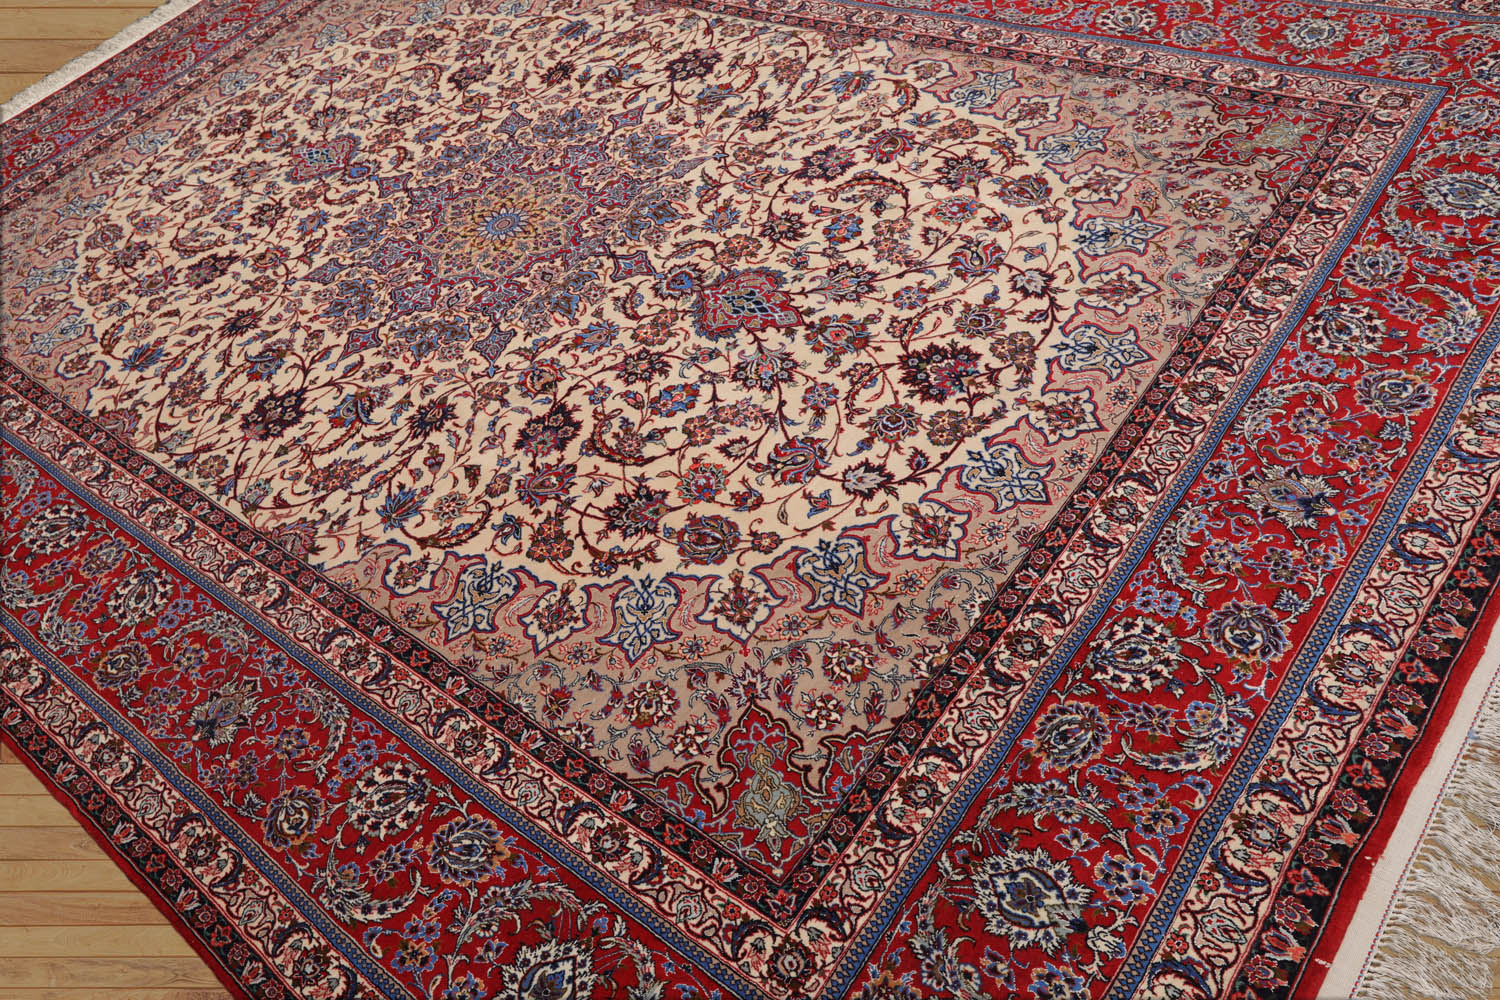 Slatington 9x12 Hand Knotted Wool and Silk Traditional Isfahan 300 KPSI Oriental Area Rug Ivory, Red Color